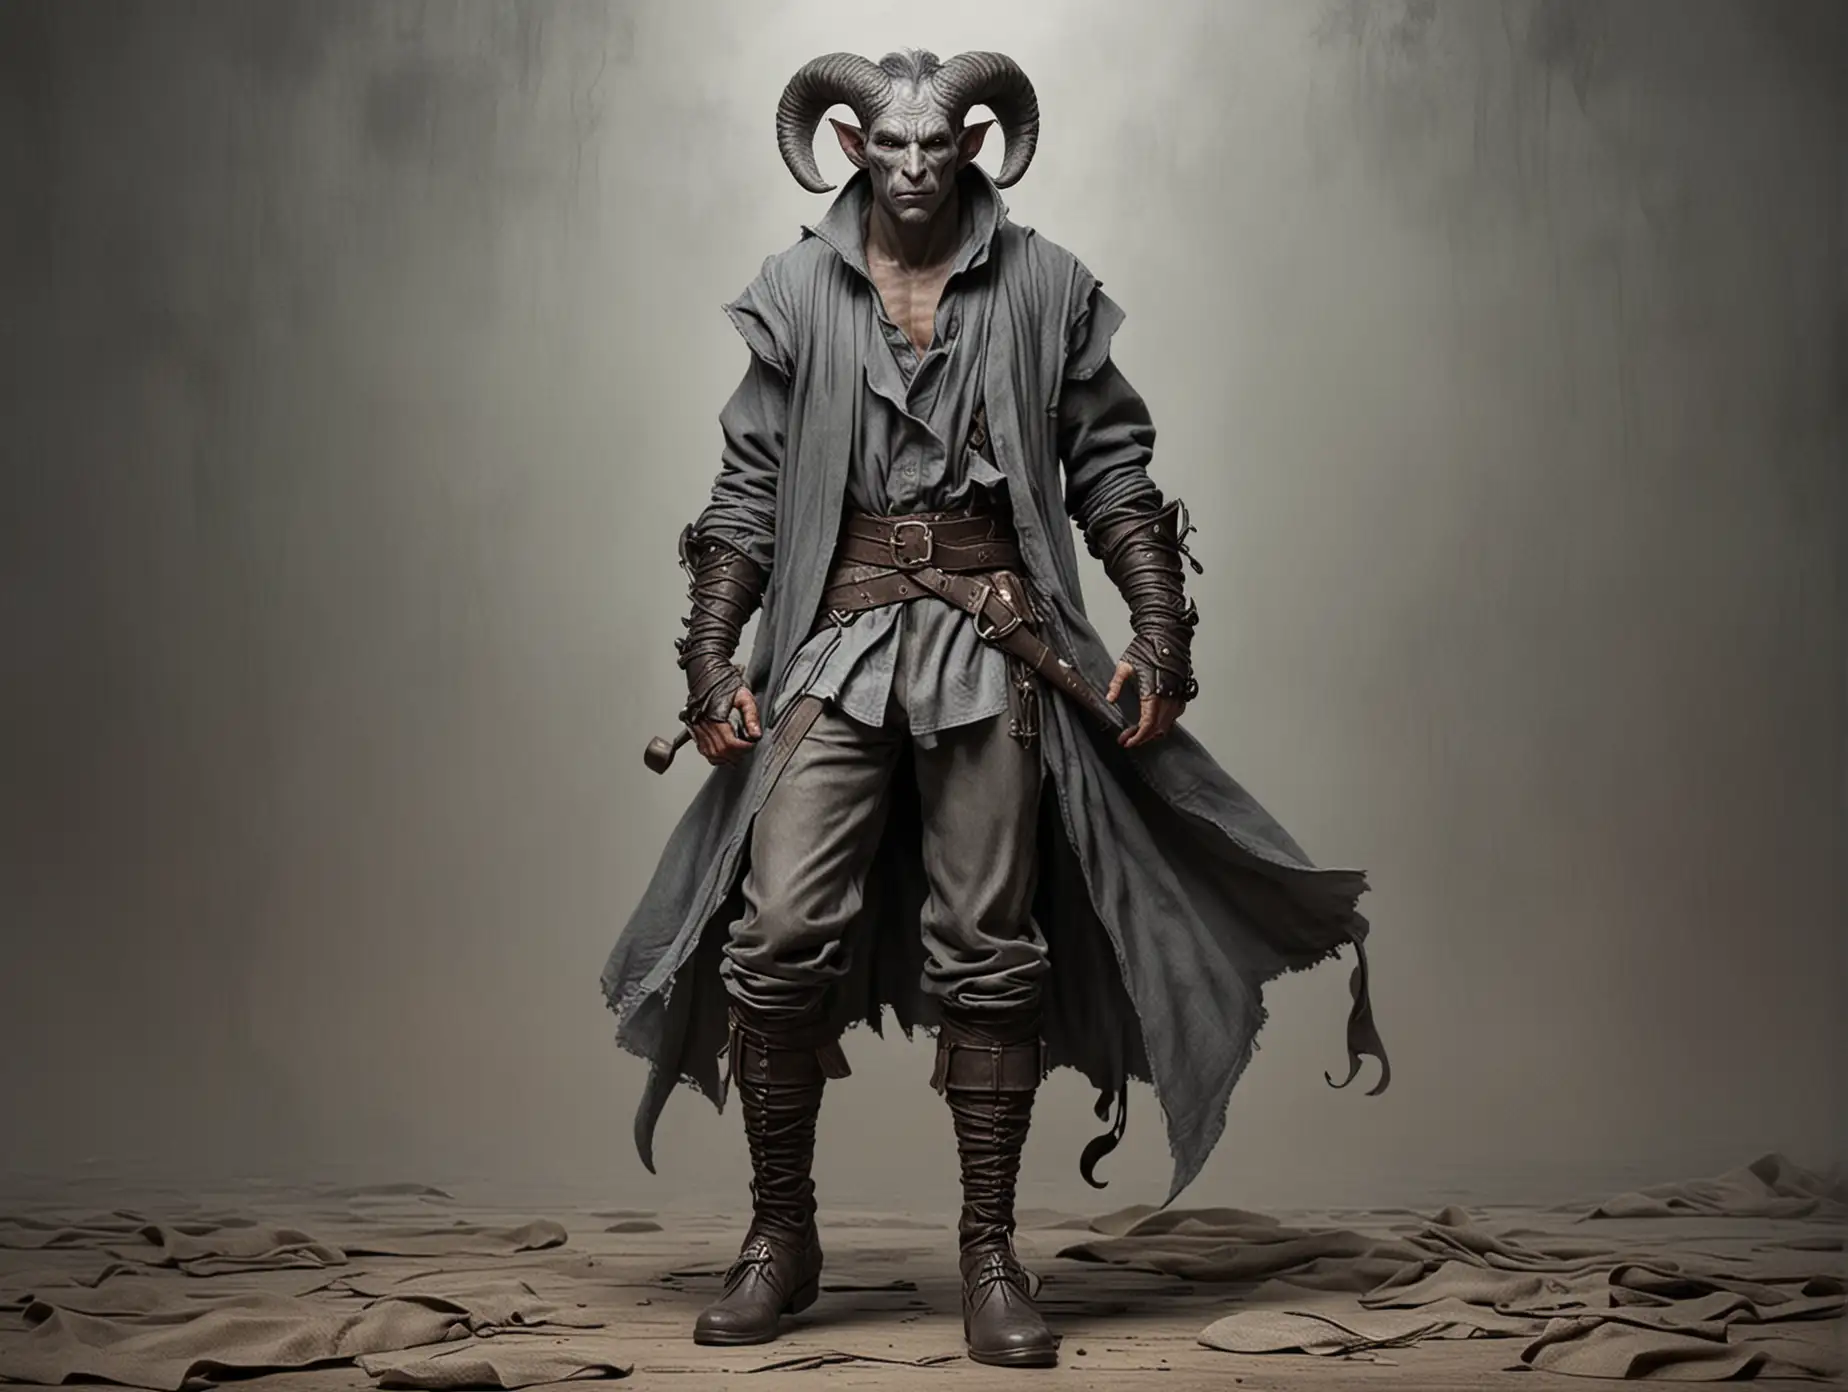 Tiefling-Man-in-Grey-Rags-with-Grey-Shoes